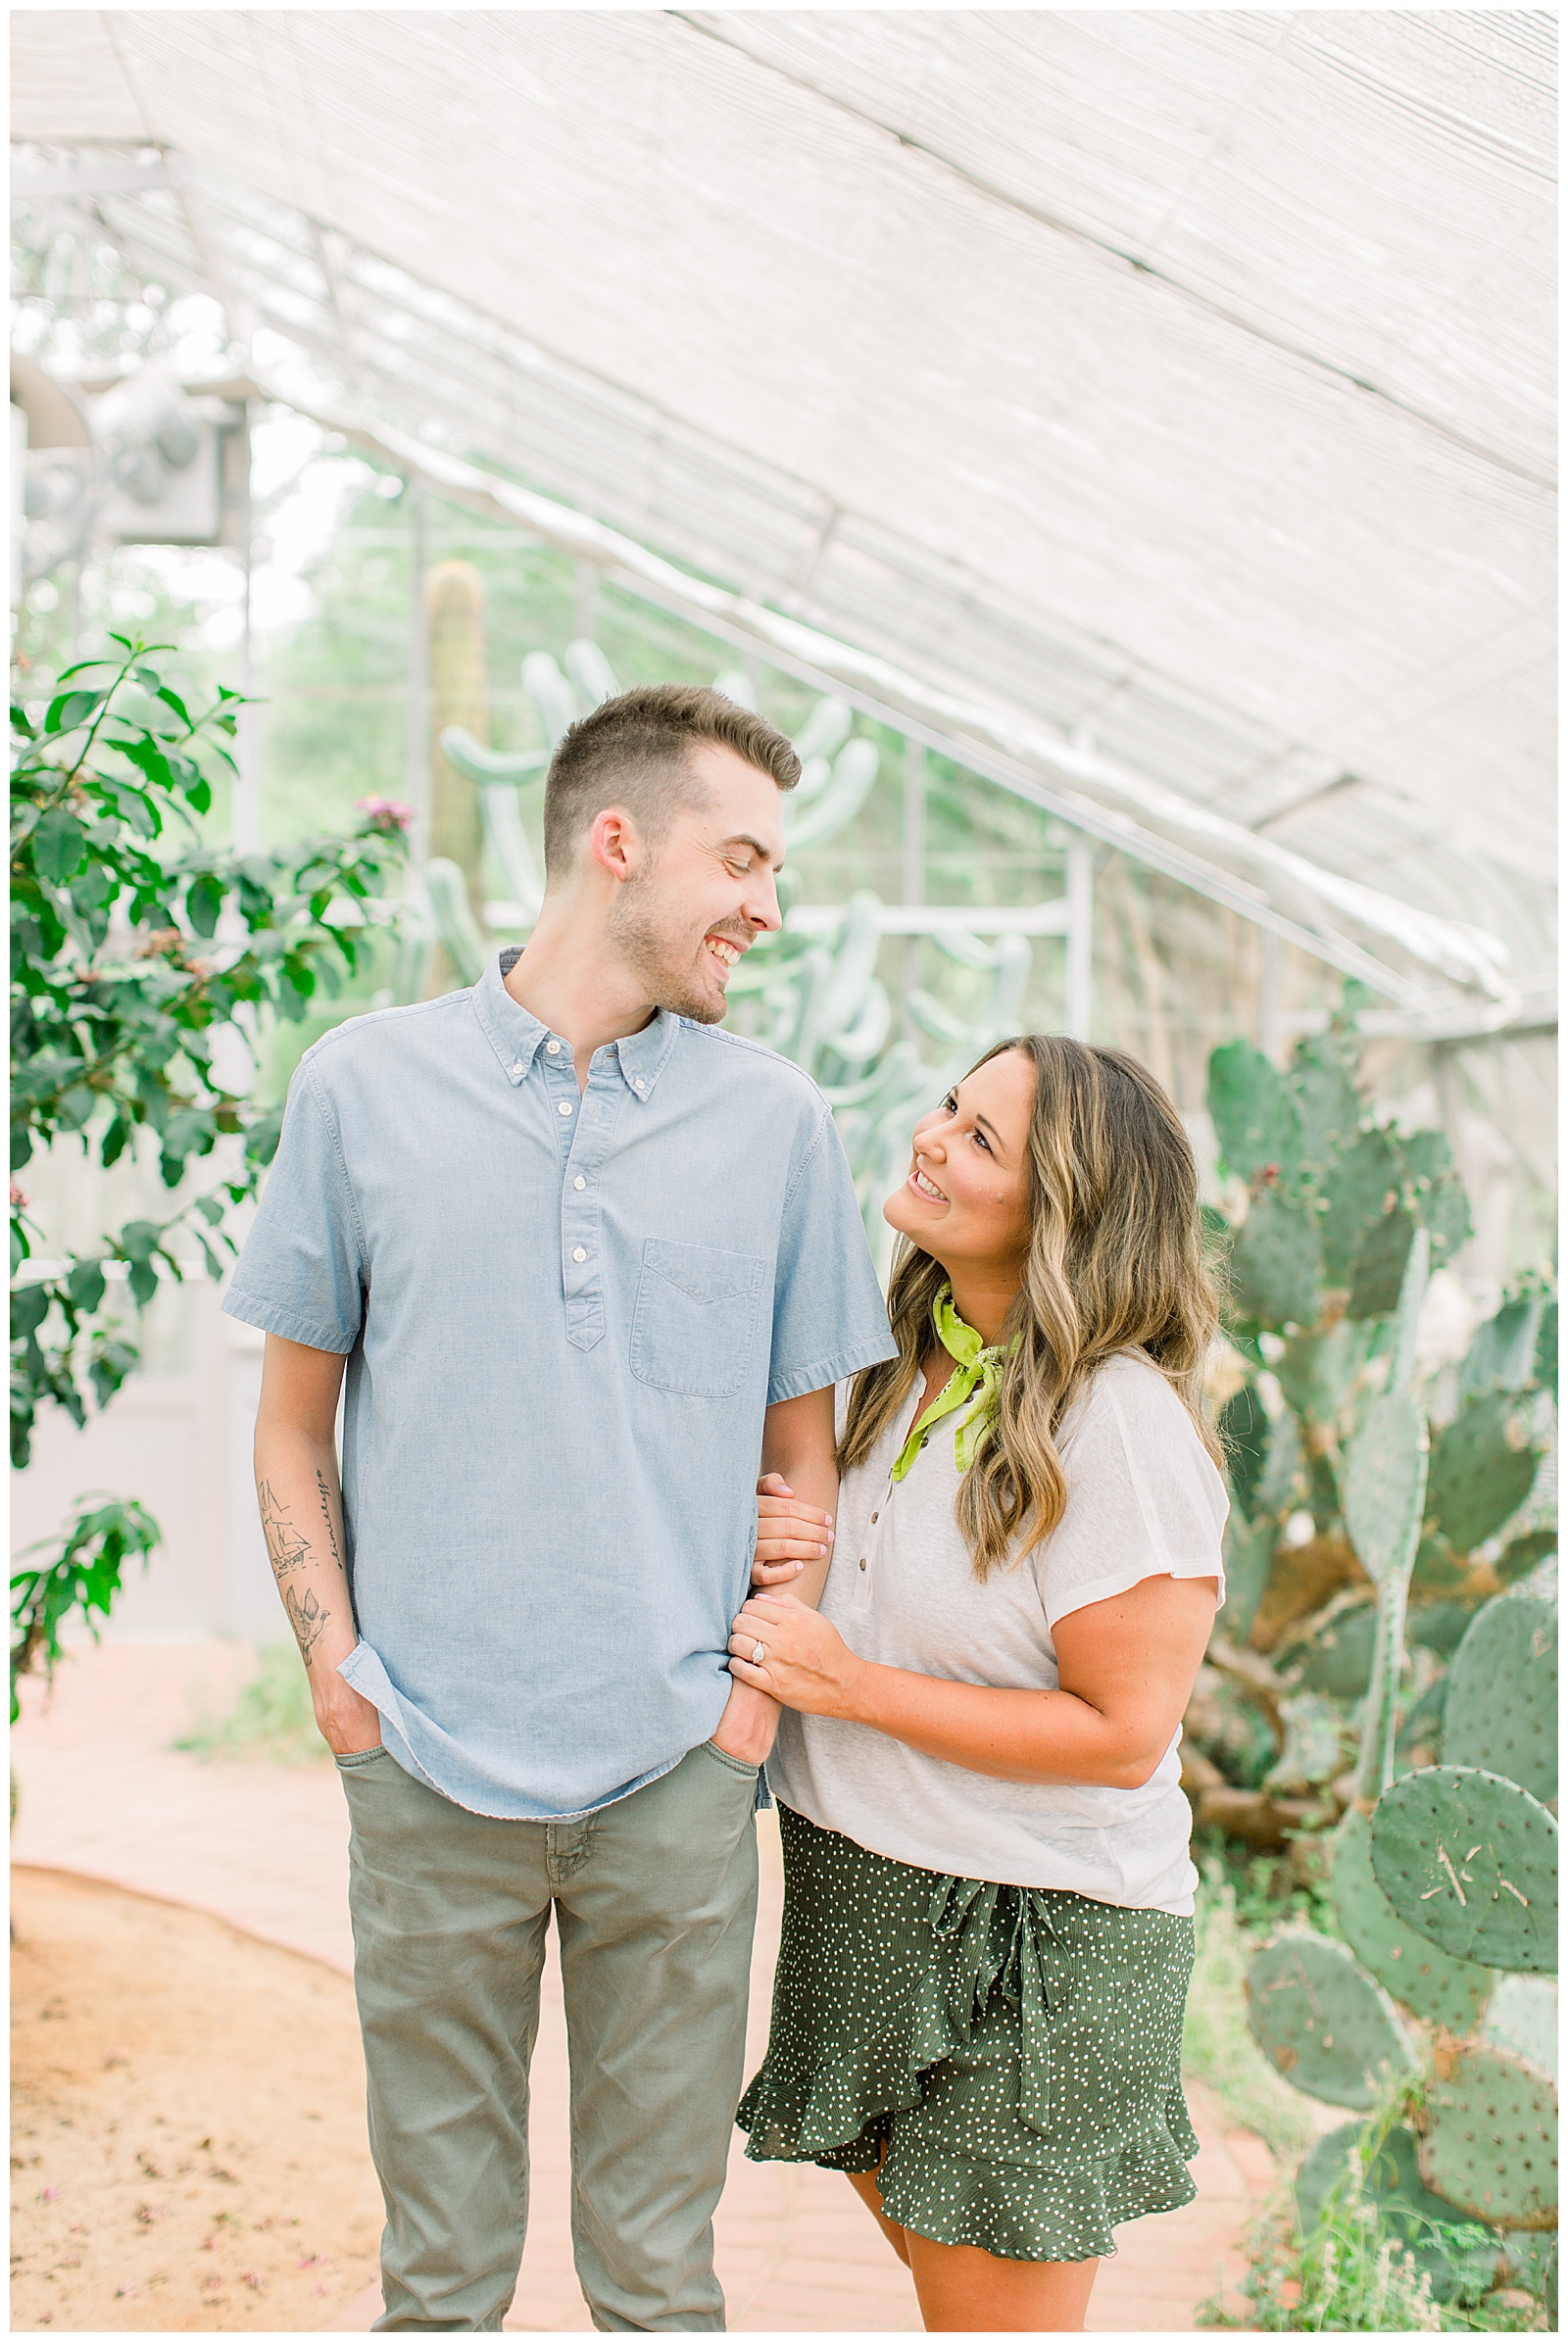 Couple in Greenhouse for Engagement Session